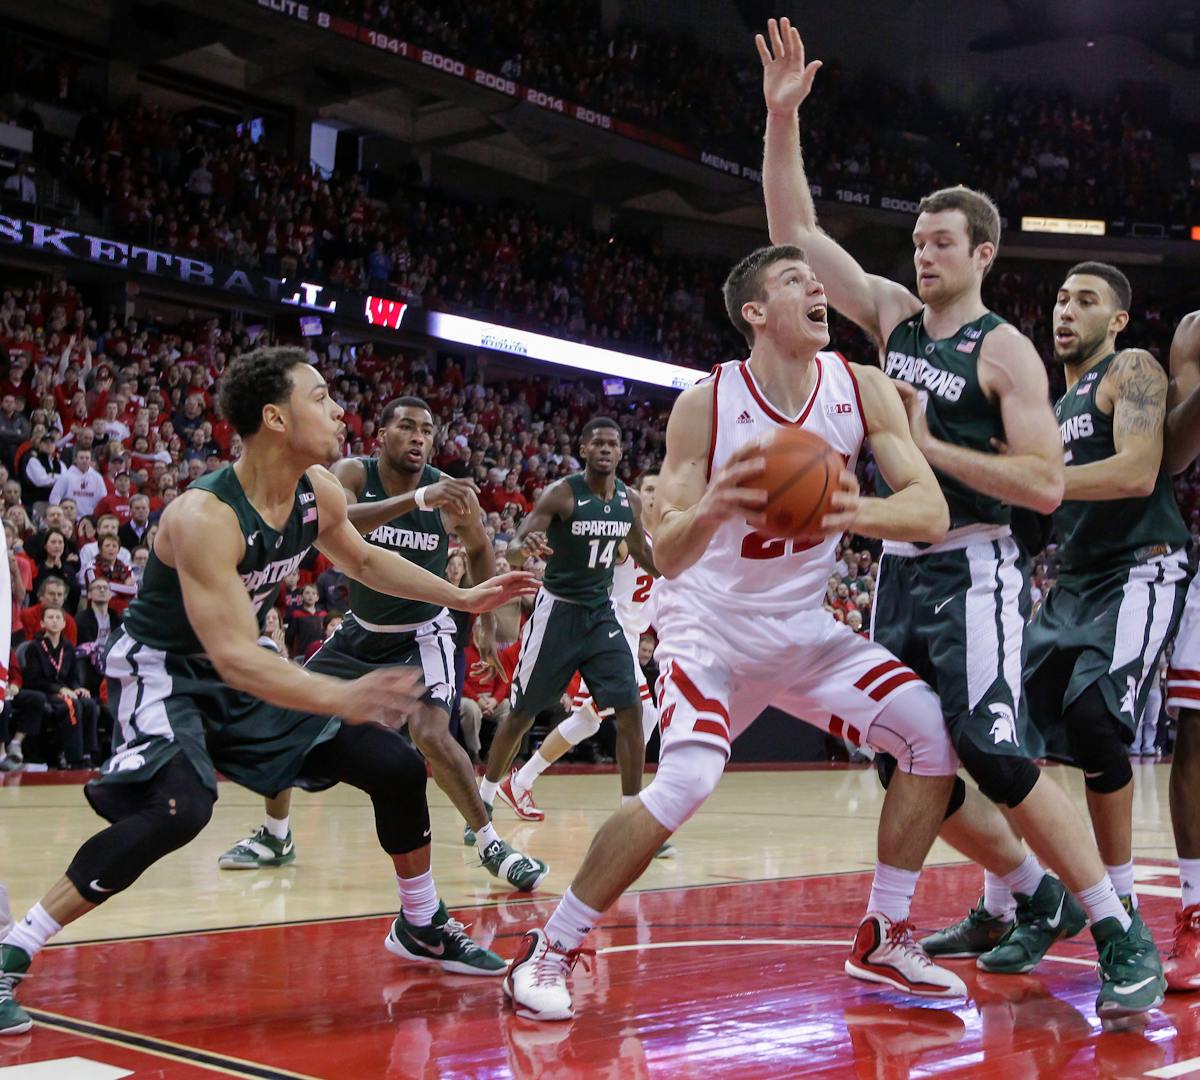 Wisconsin's Ethan Happ lined up his game-winning shot against Michigan State's Matt Costello, second from right, during the Badgers' 77-76 upset over 